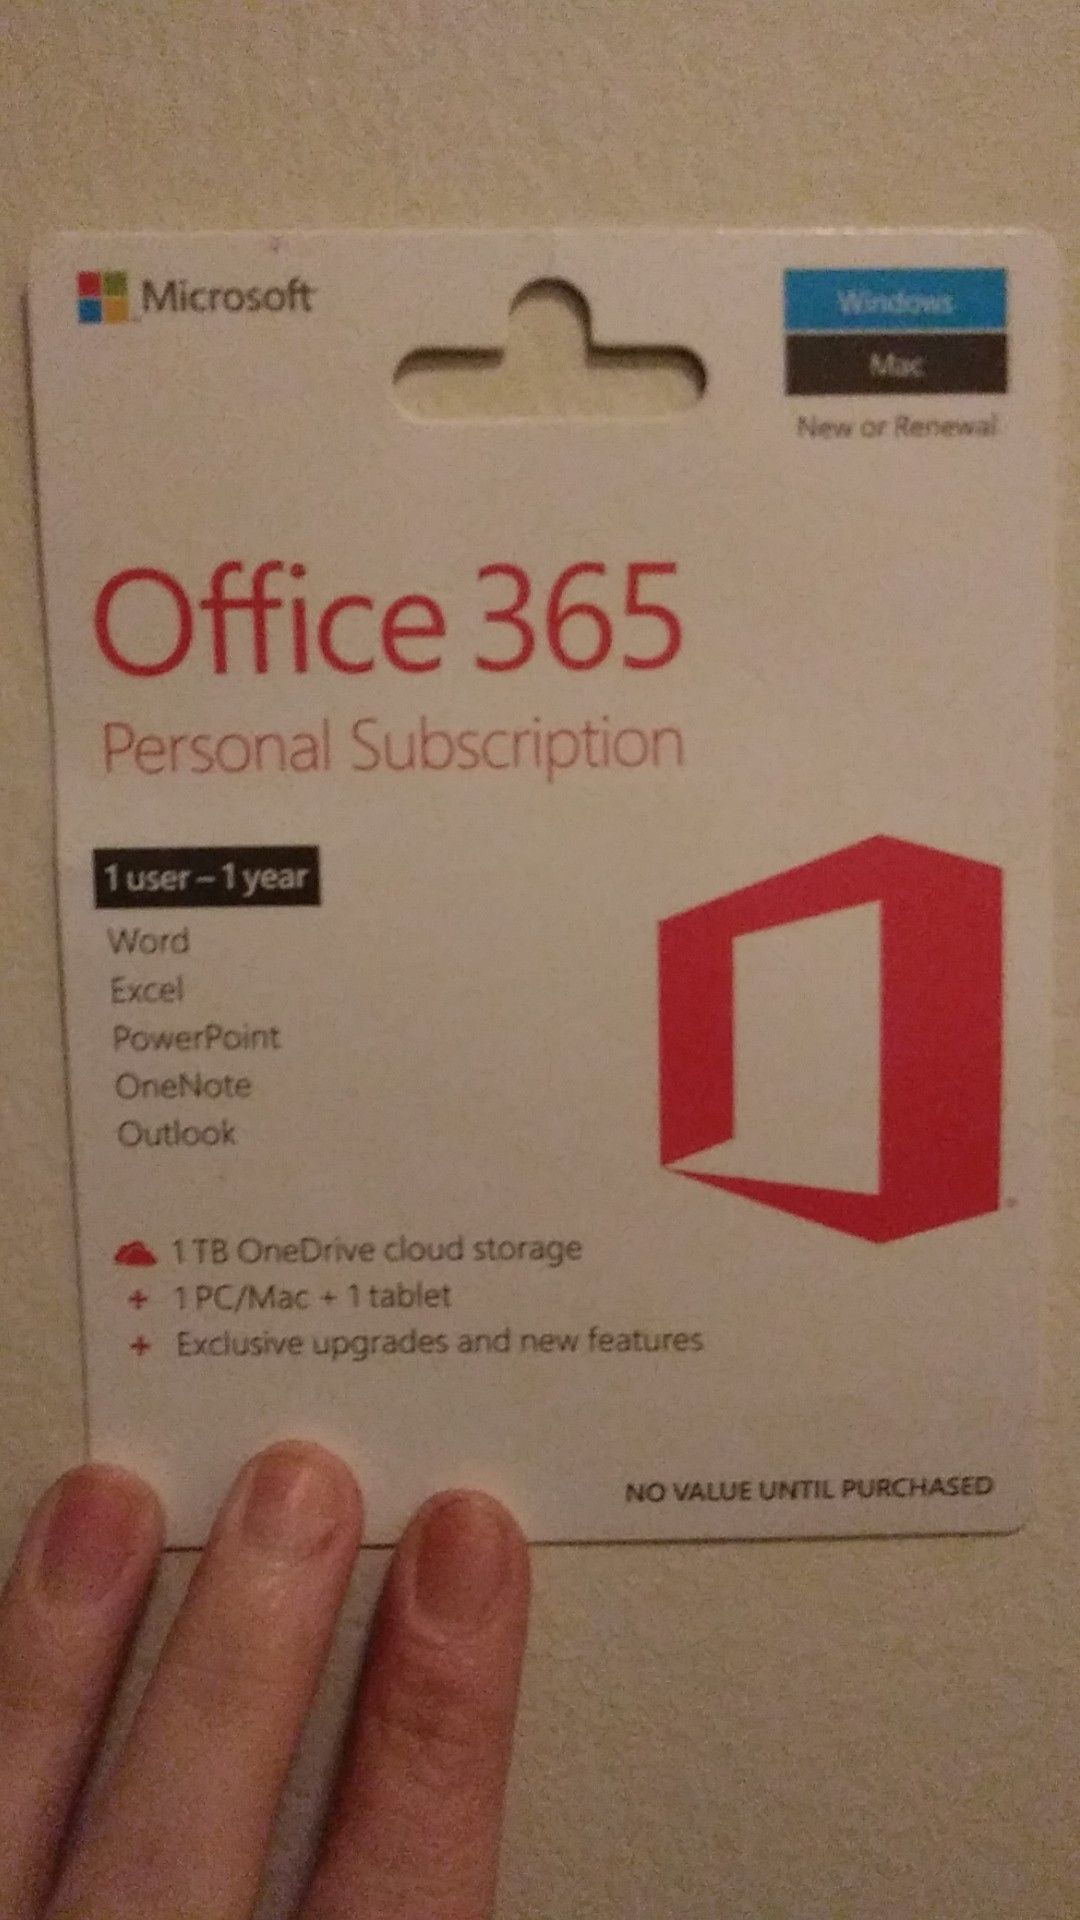 Office 365 1 year personal subscription.